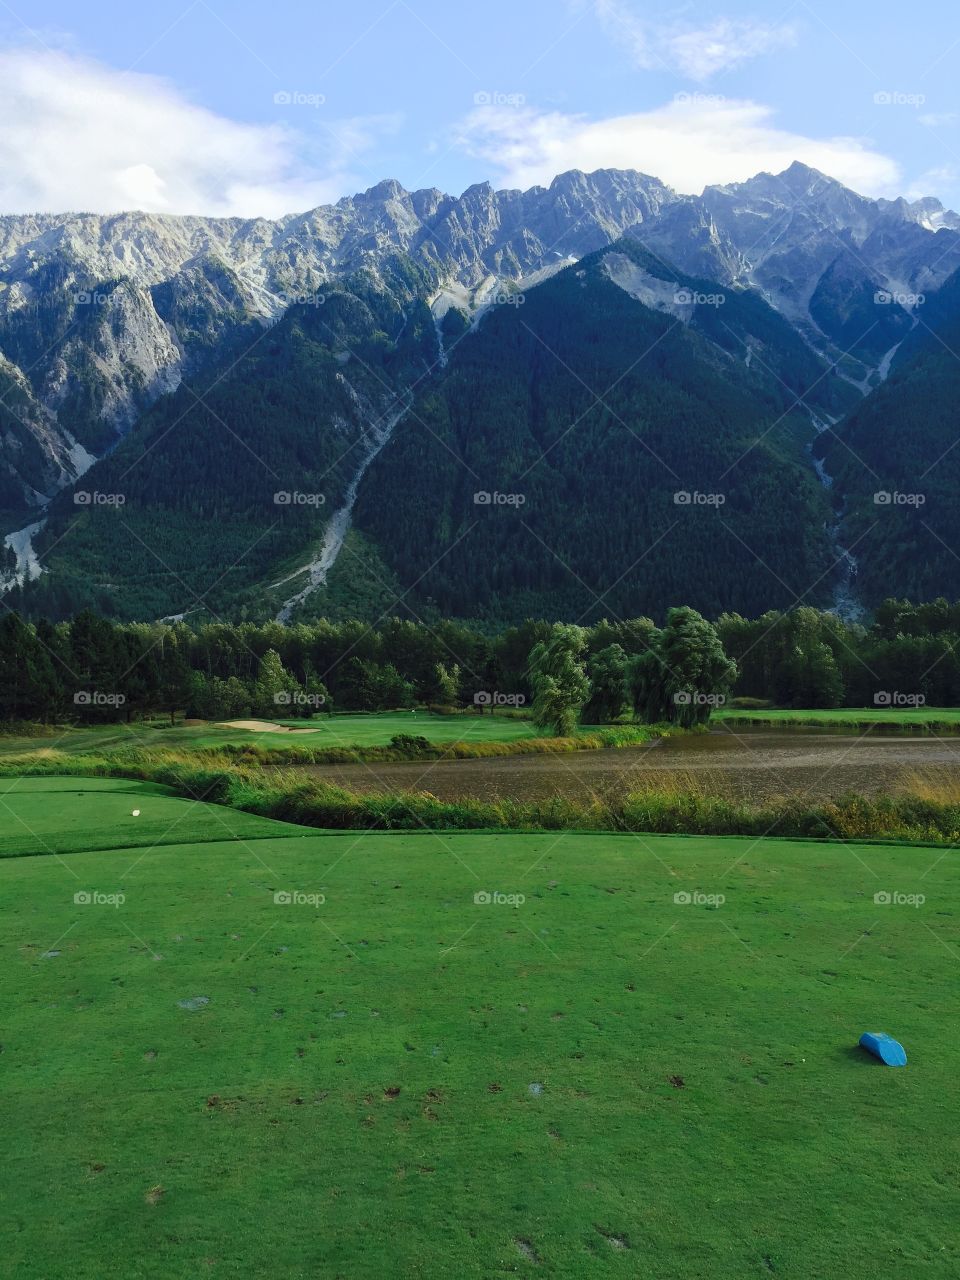 Big Sky Golf Course, Pemberton, BC with Mt Currie in background.